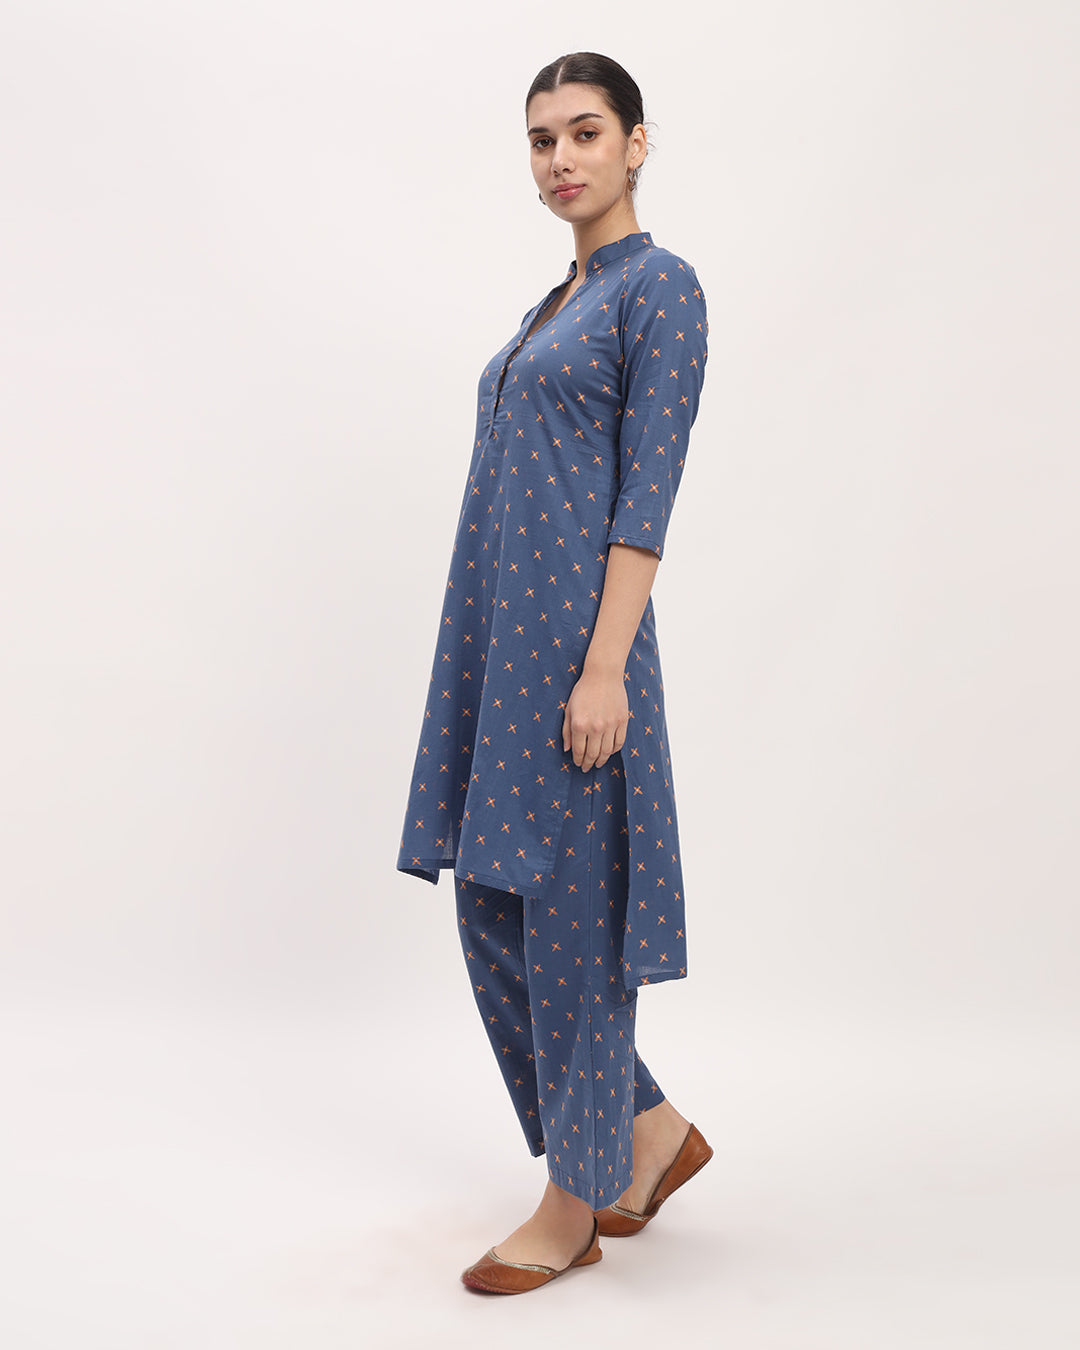 Blue Starry Tropical High-Low Printed Kurta (Without Bottoms)